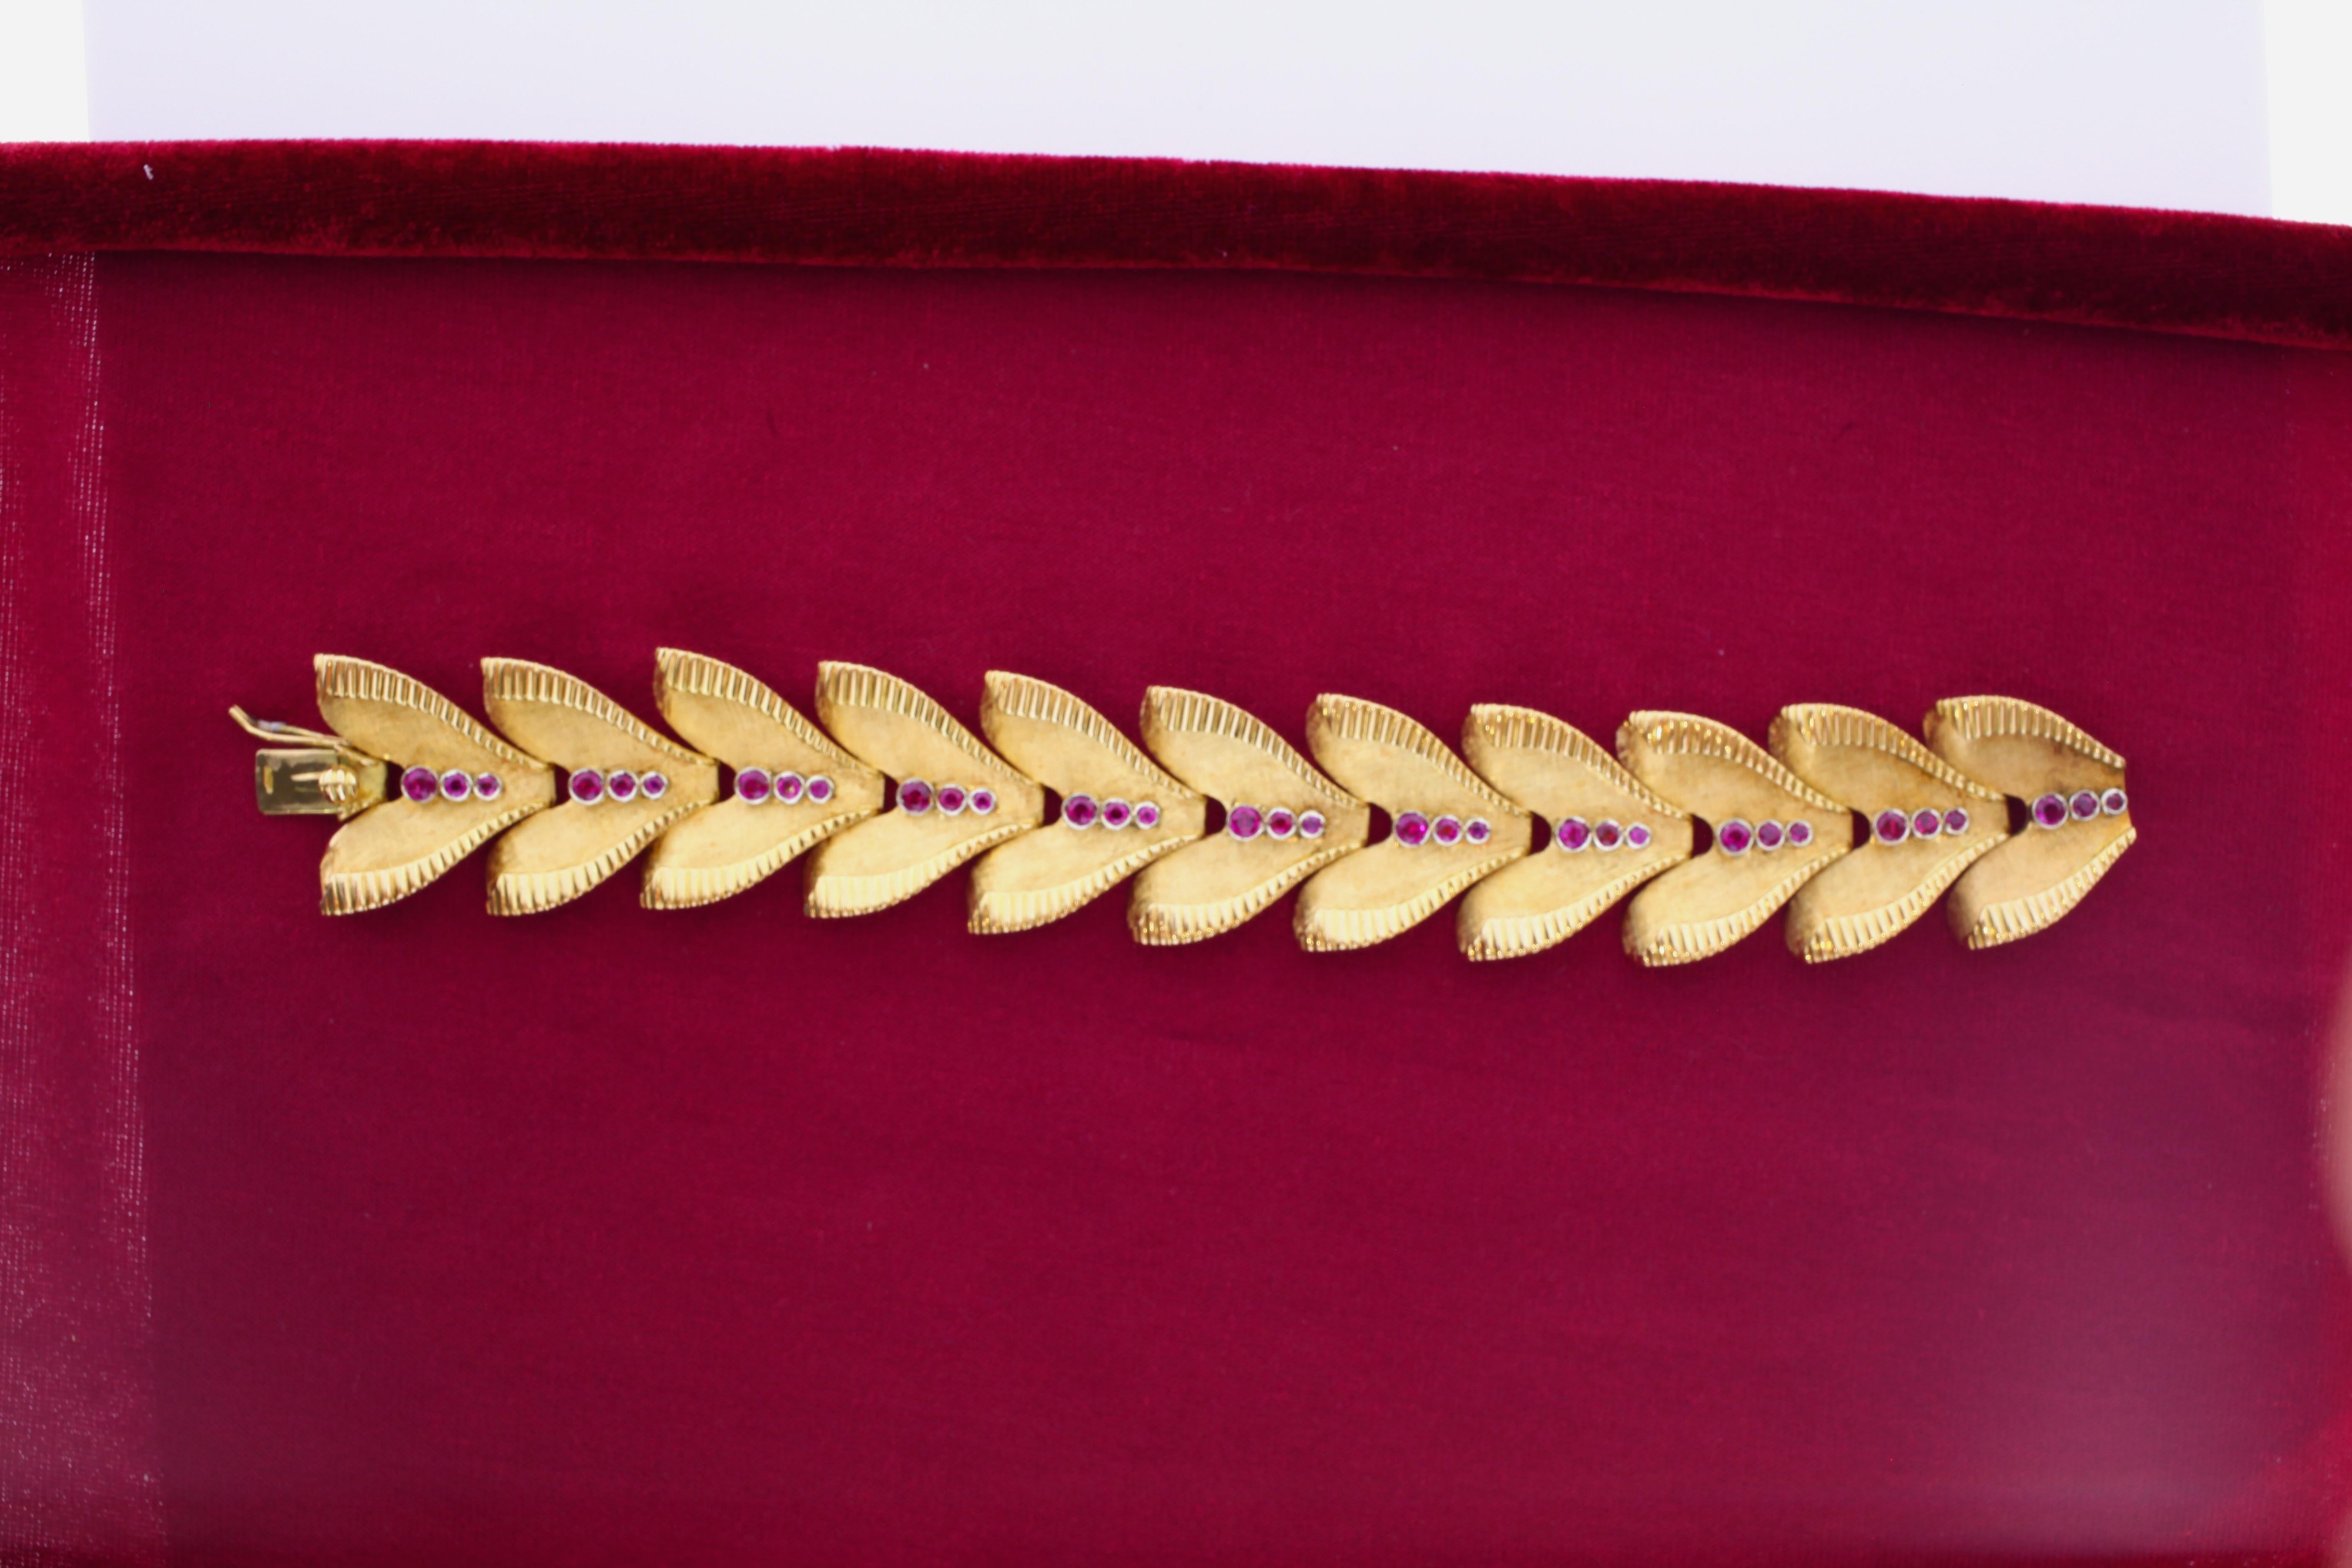 This 18 karat yellow gold bracelet weighing 87 grams was made in Italy (most probably Milan) in the early 1940s. The arrowhead motif is typical of the futurist art movement of the time and emphasizes dynamism, change, speed, and progress. 33